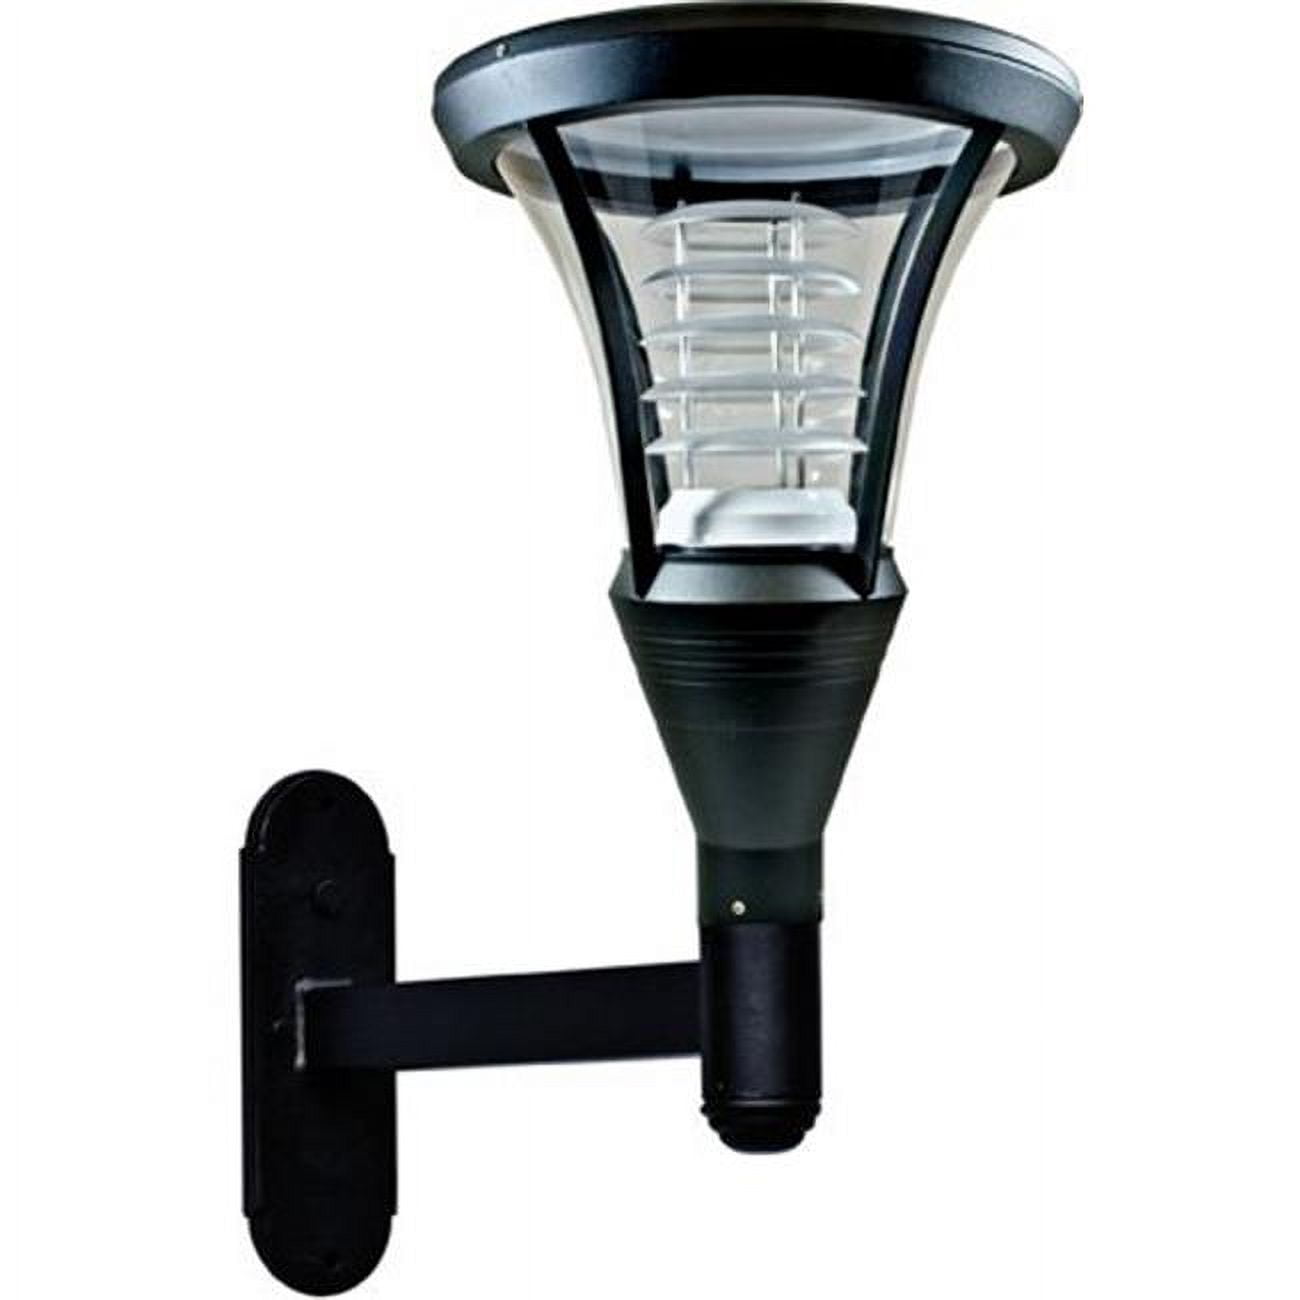 Picture of Dabmar Lighting GM636-B 70W 120V Powder Coated Cast Aluminum Wall Light Fixture with Metal Halide Lamp, Black